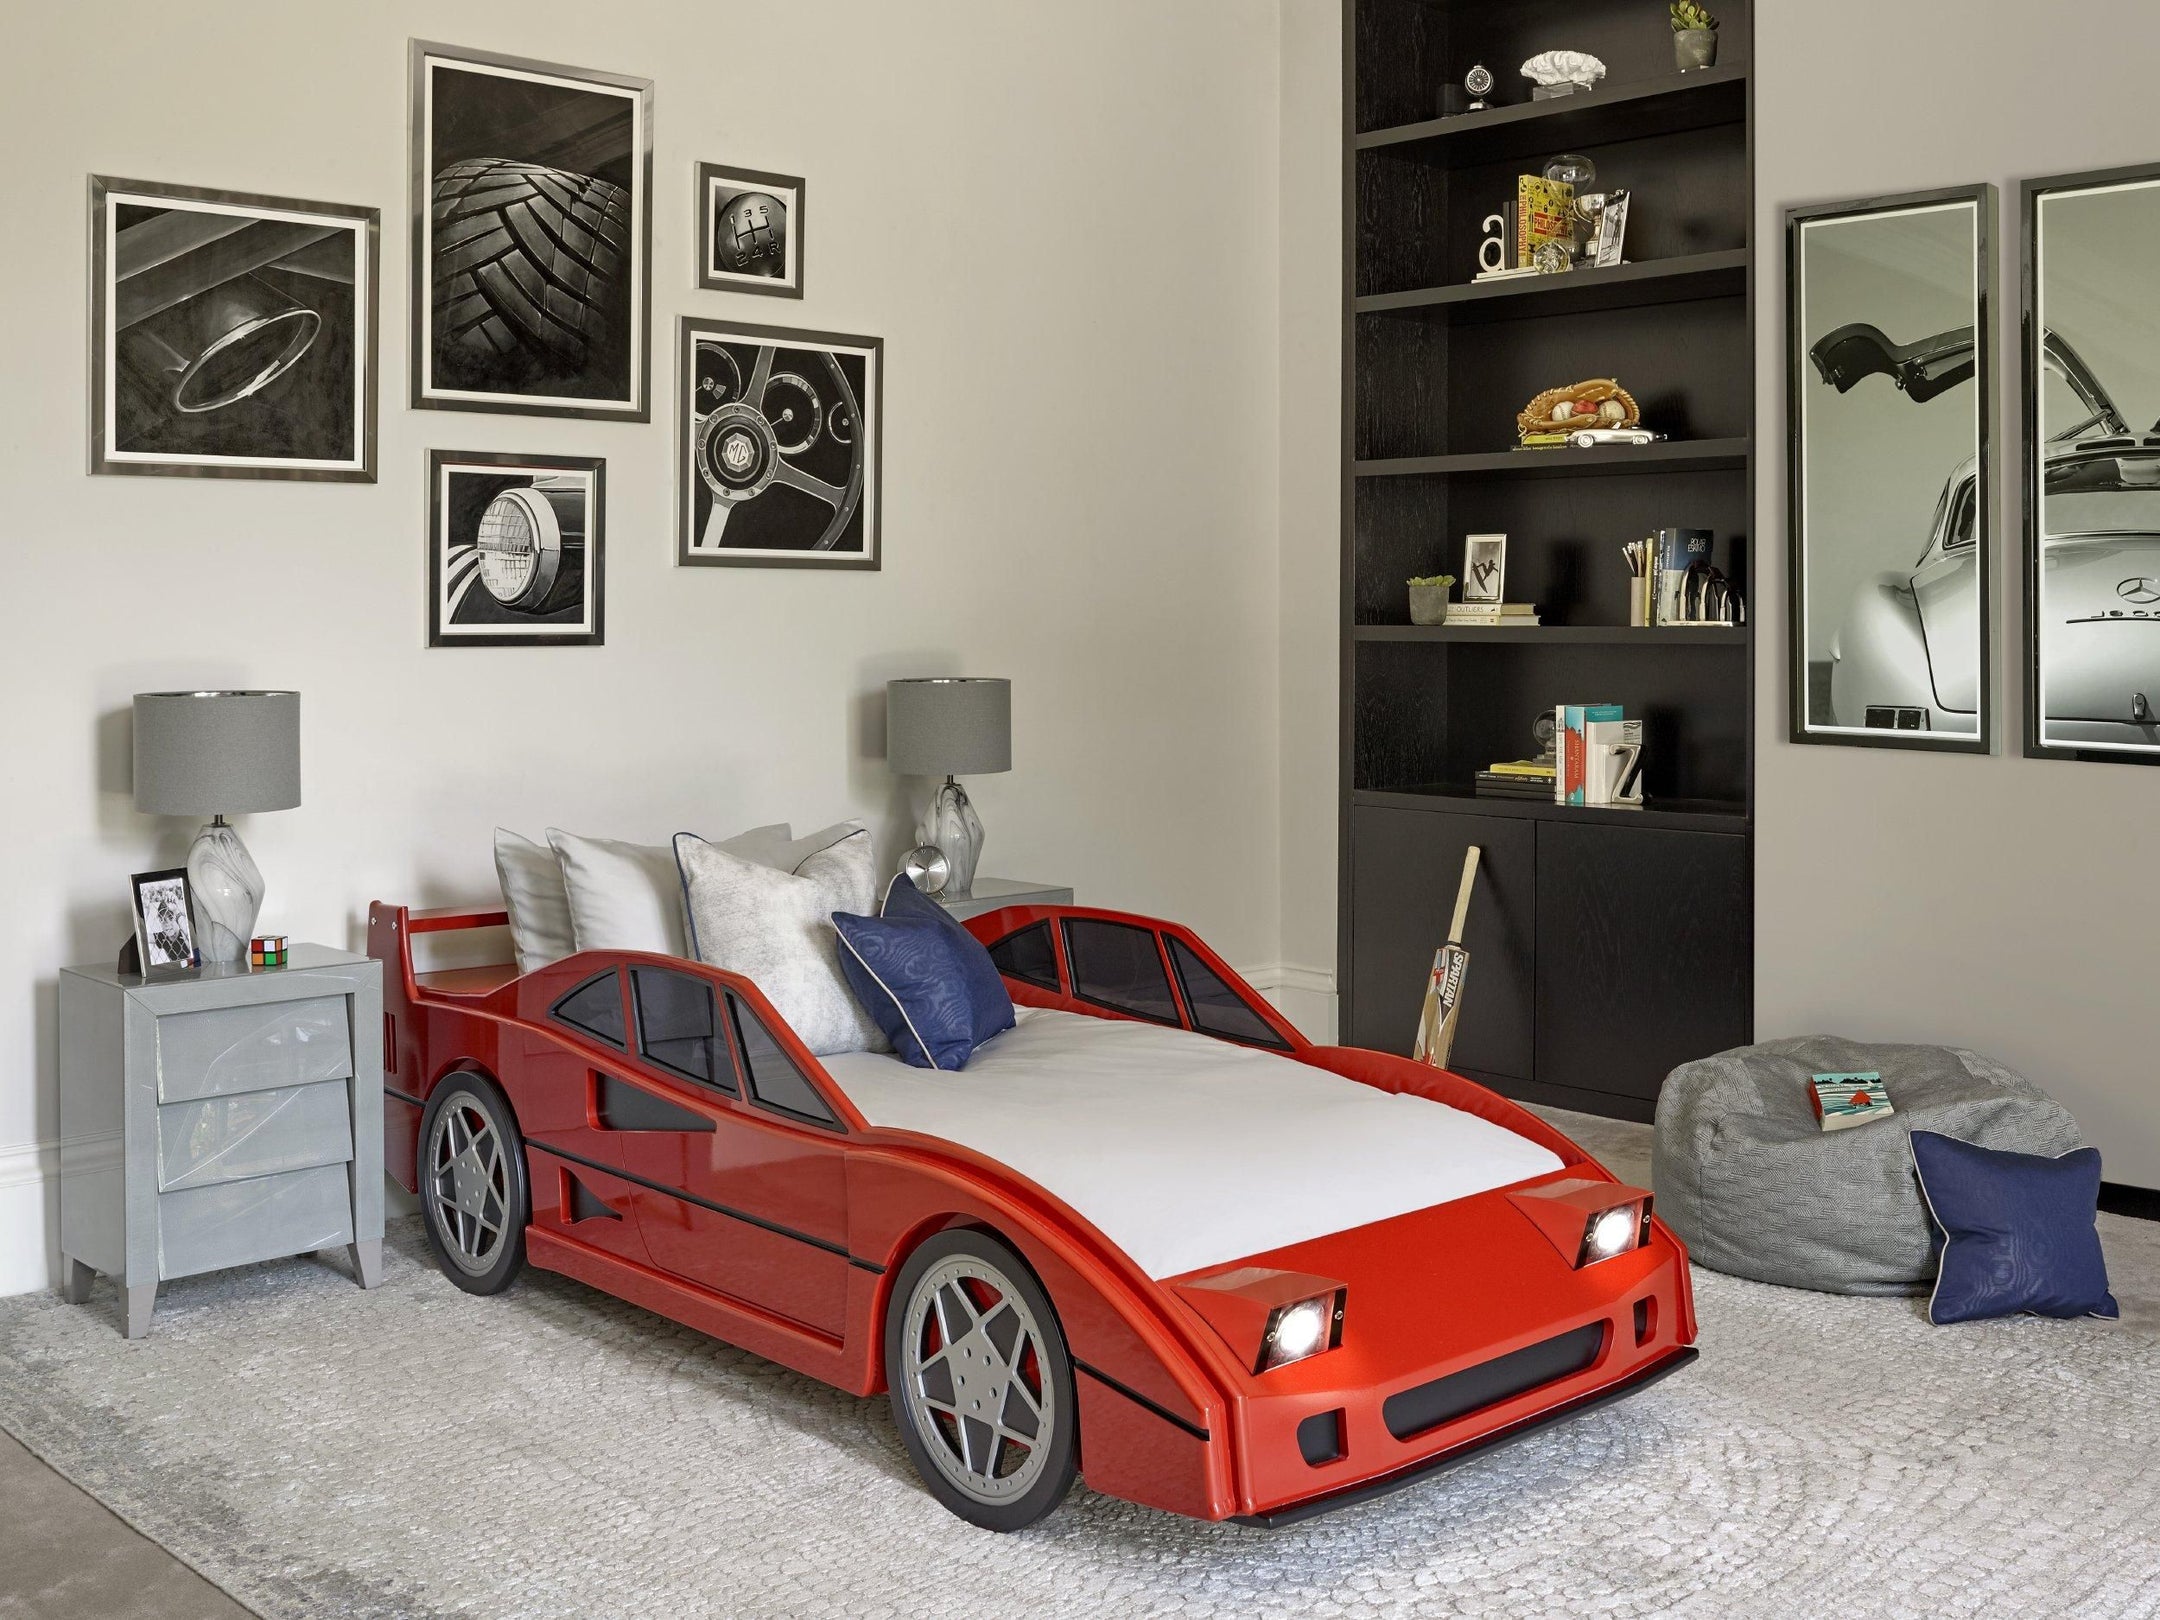 The Dragons RC79 - Single Racing Car Bed in Red